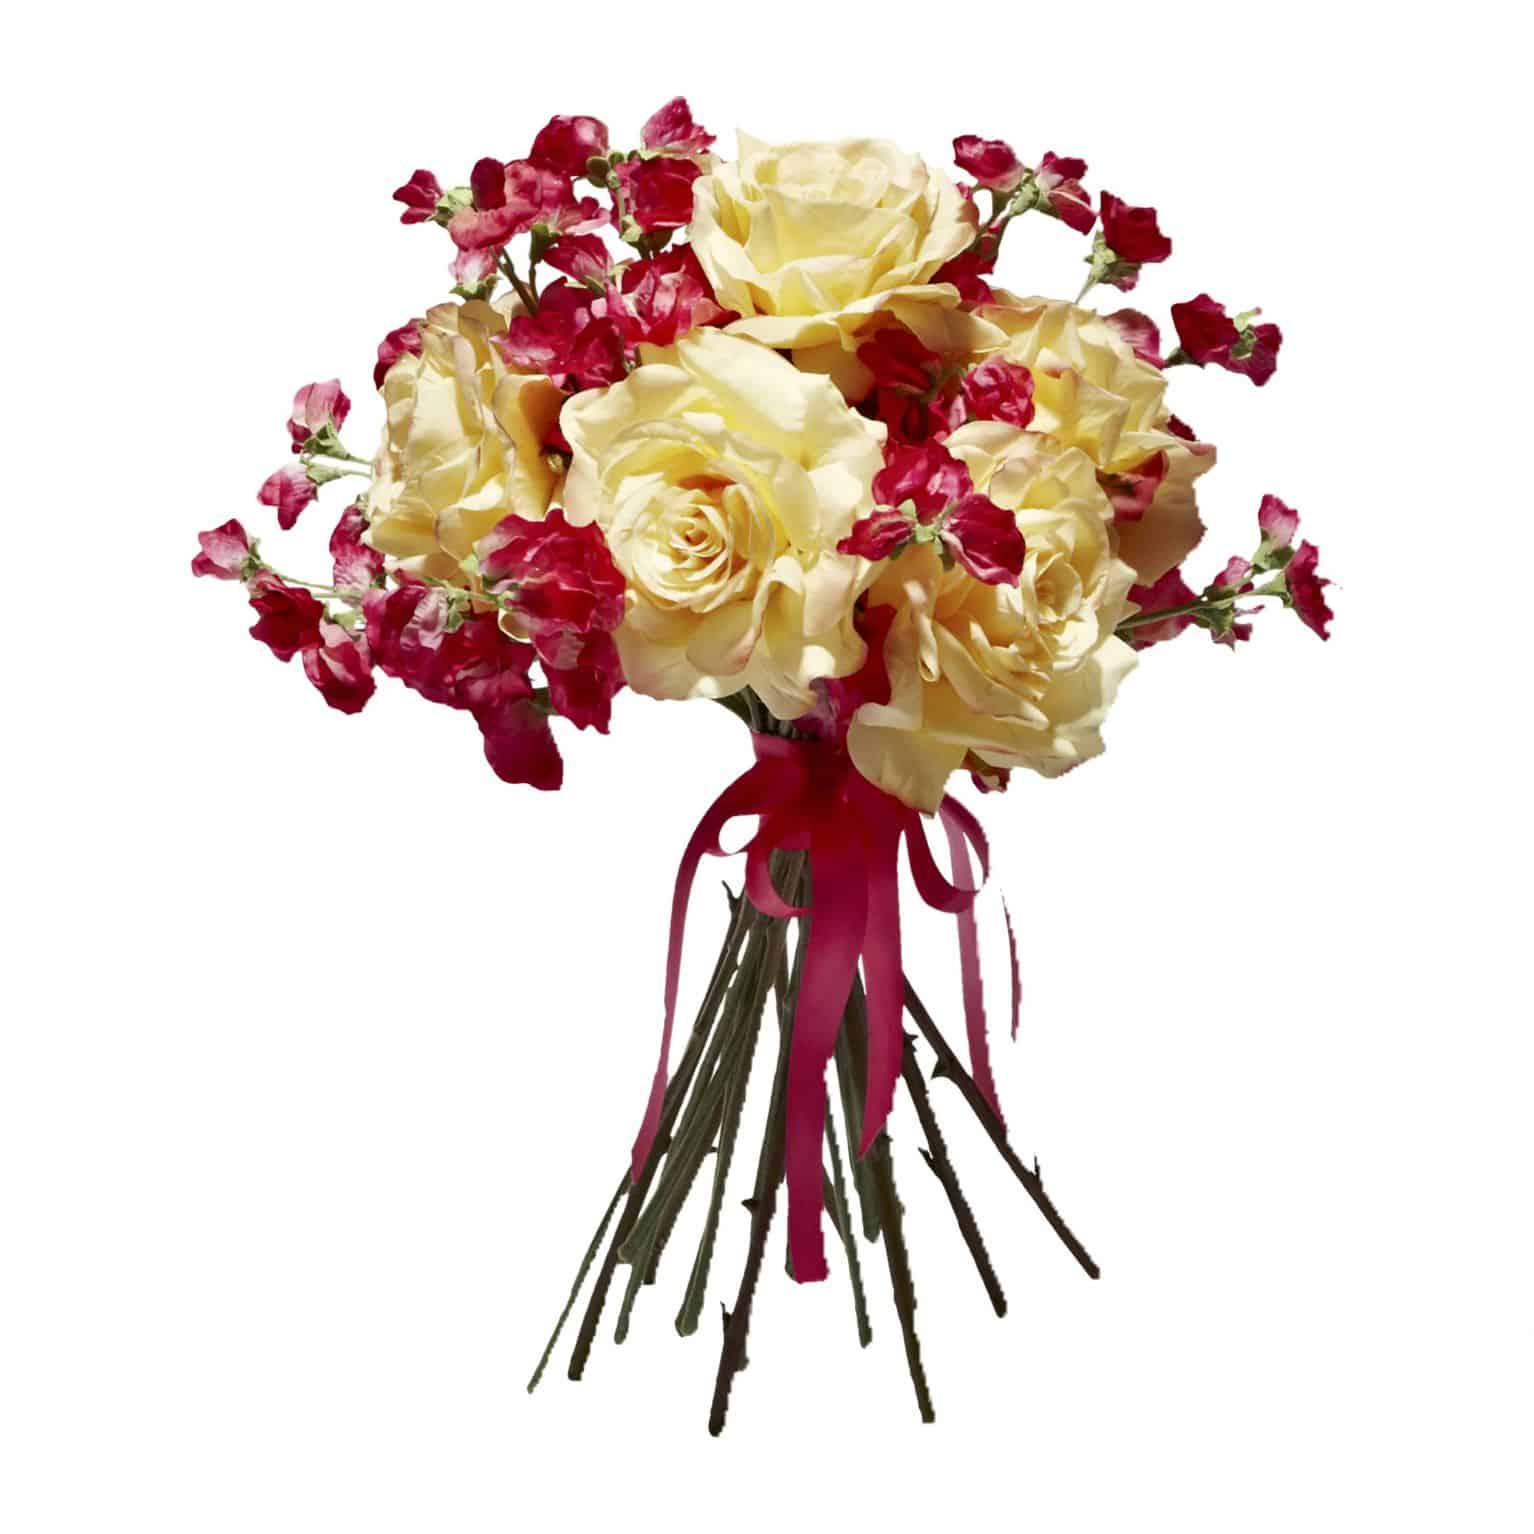 Adore our lovely summer floral bouquet with faux pink fuchsia sweet pea flowers & perfect imitation English garden yellow silk rose flowers for a warm aura.